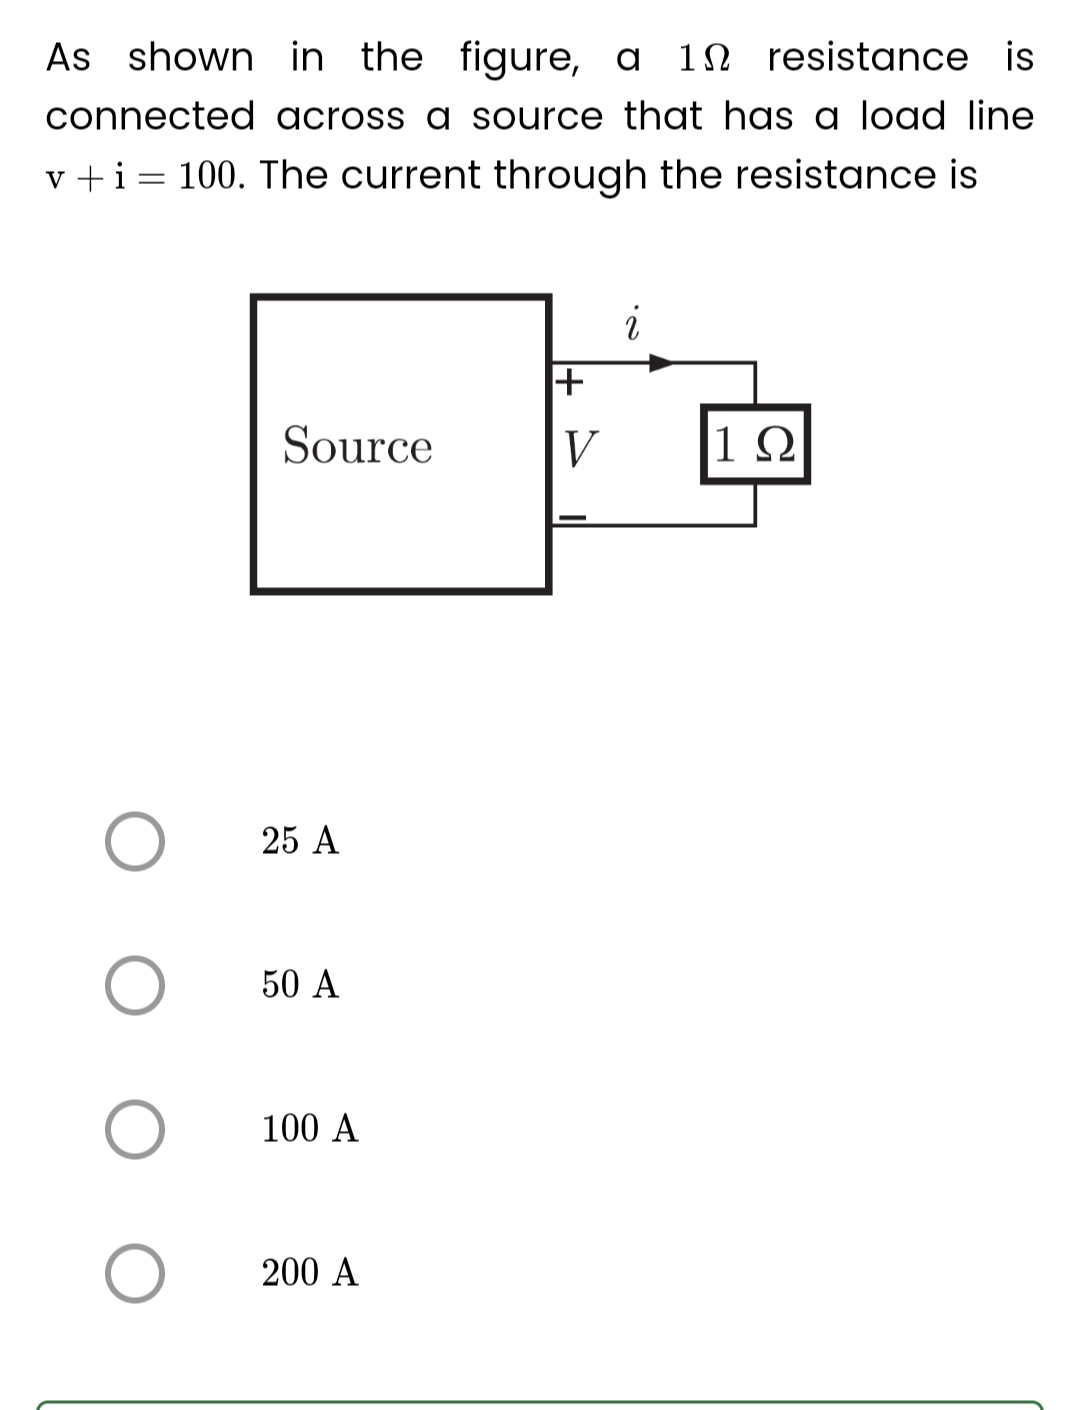 resistance is
As shown in the figure, a 1
connected across a source that has a load line
v + i = 100. The current through the resistance is
O
O
Source
25 A
50 A
100 A
200 A
+
V
i
1Ω